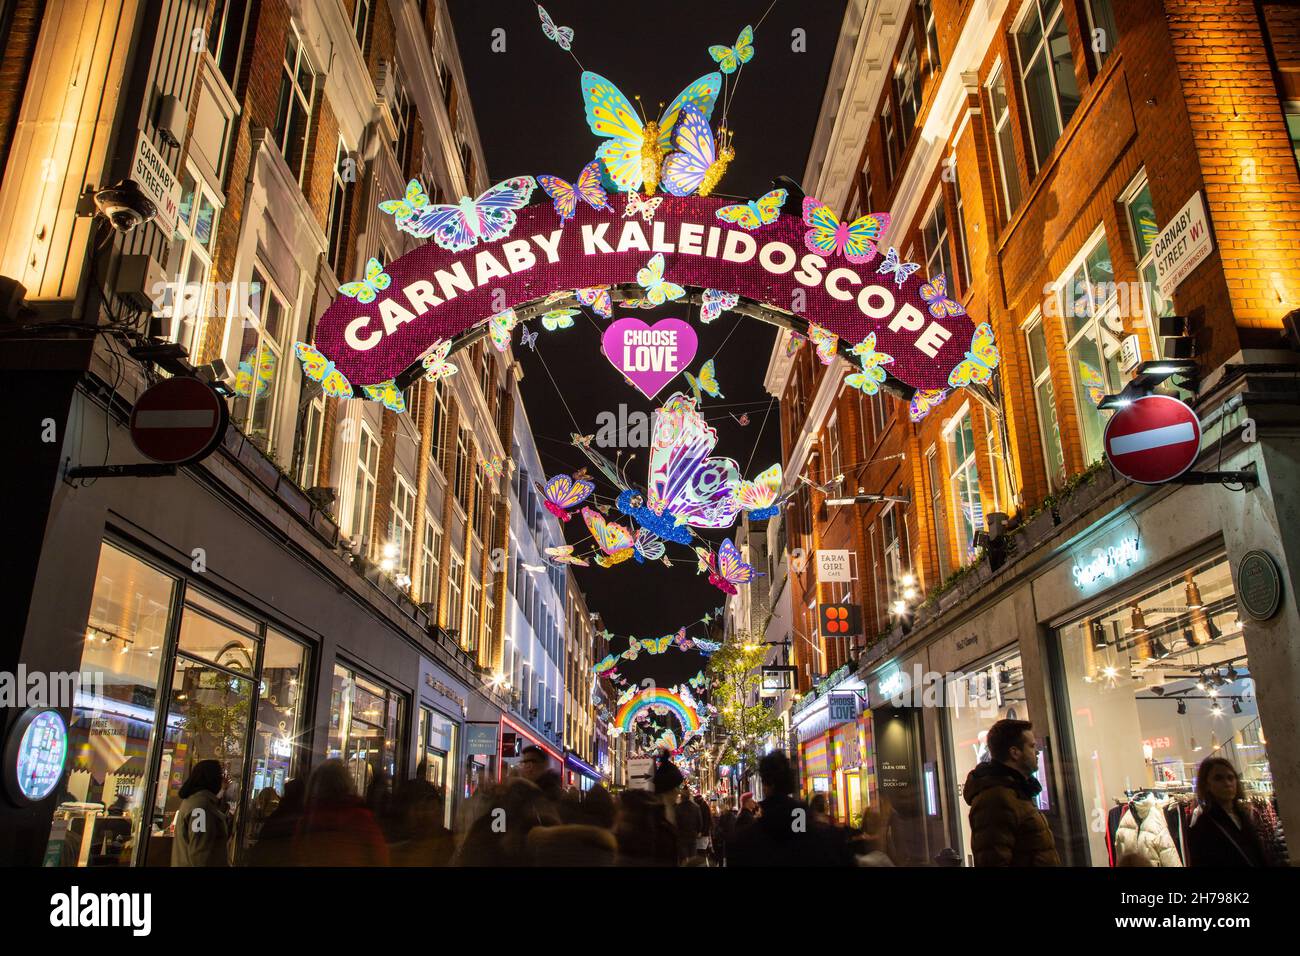 LONDON, UK - 20TH NOV 2021: Views along Carnaby Street in London at Christmas showing the decorations and outside of shops. People can be seen outside Stock Photo